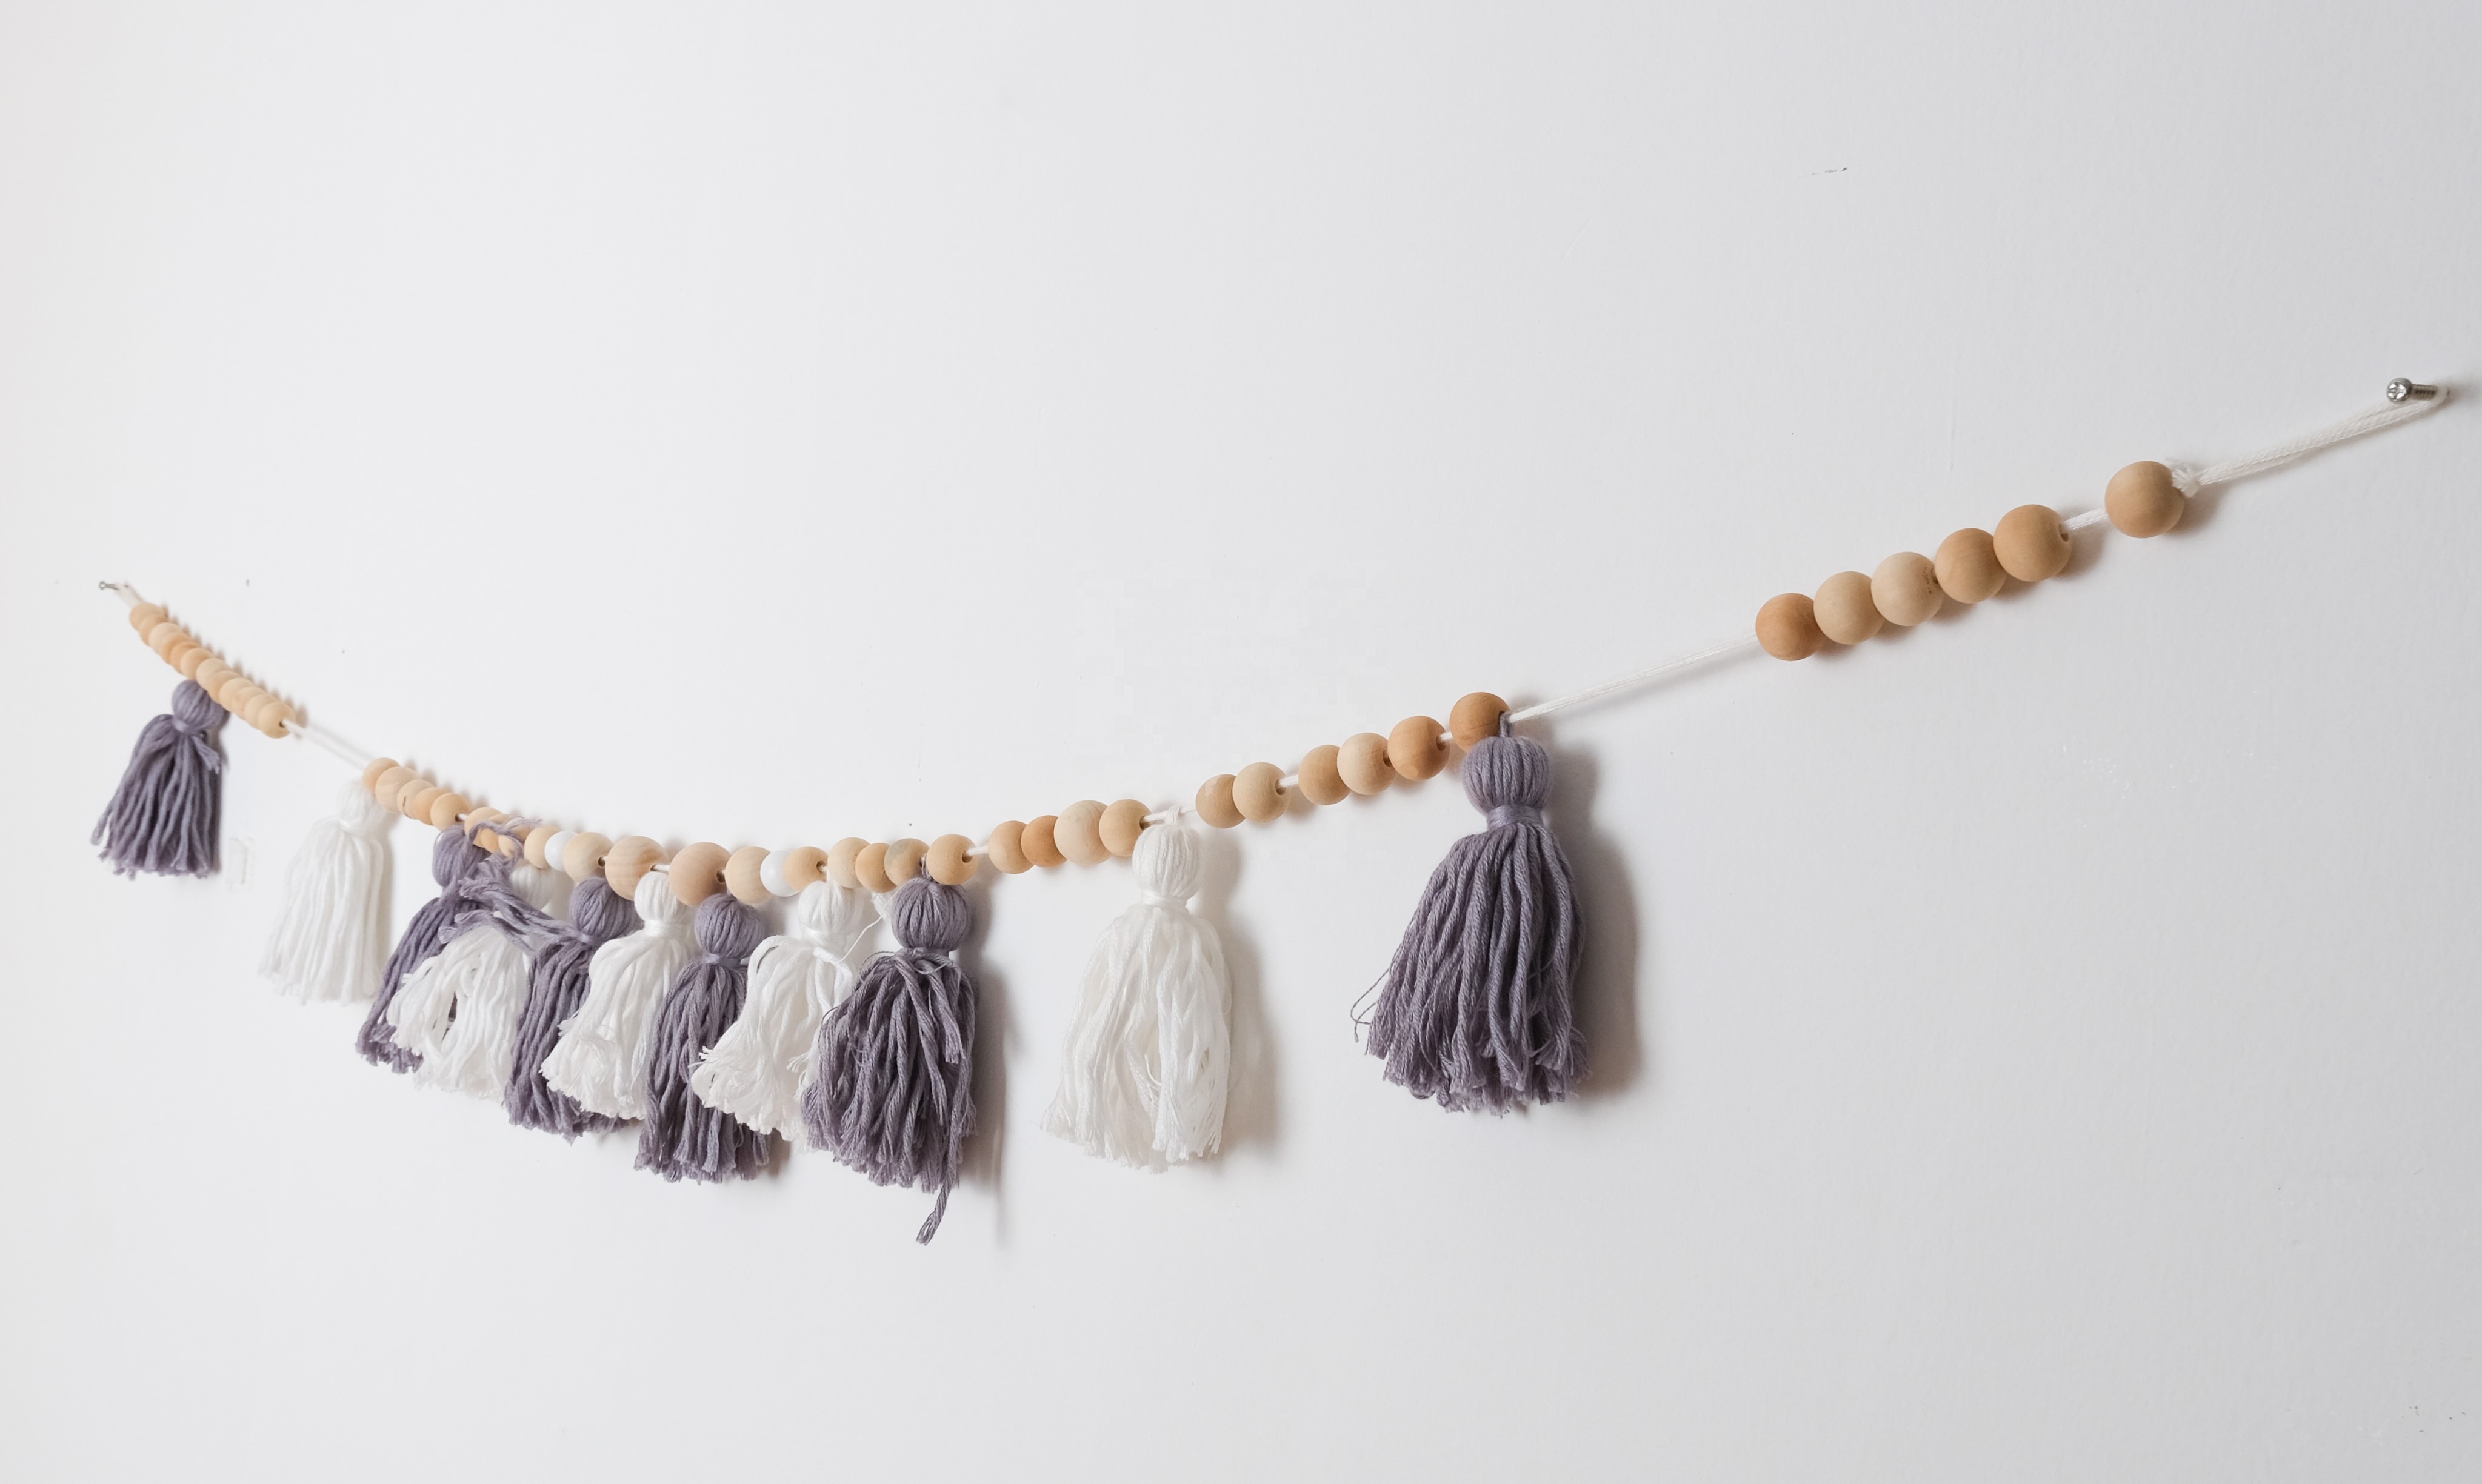 purple and white tassle beaded bunting wall decor